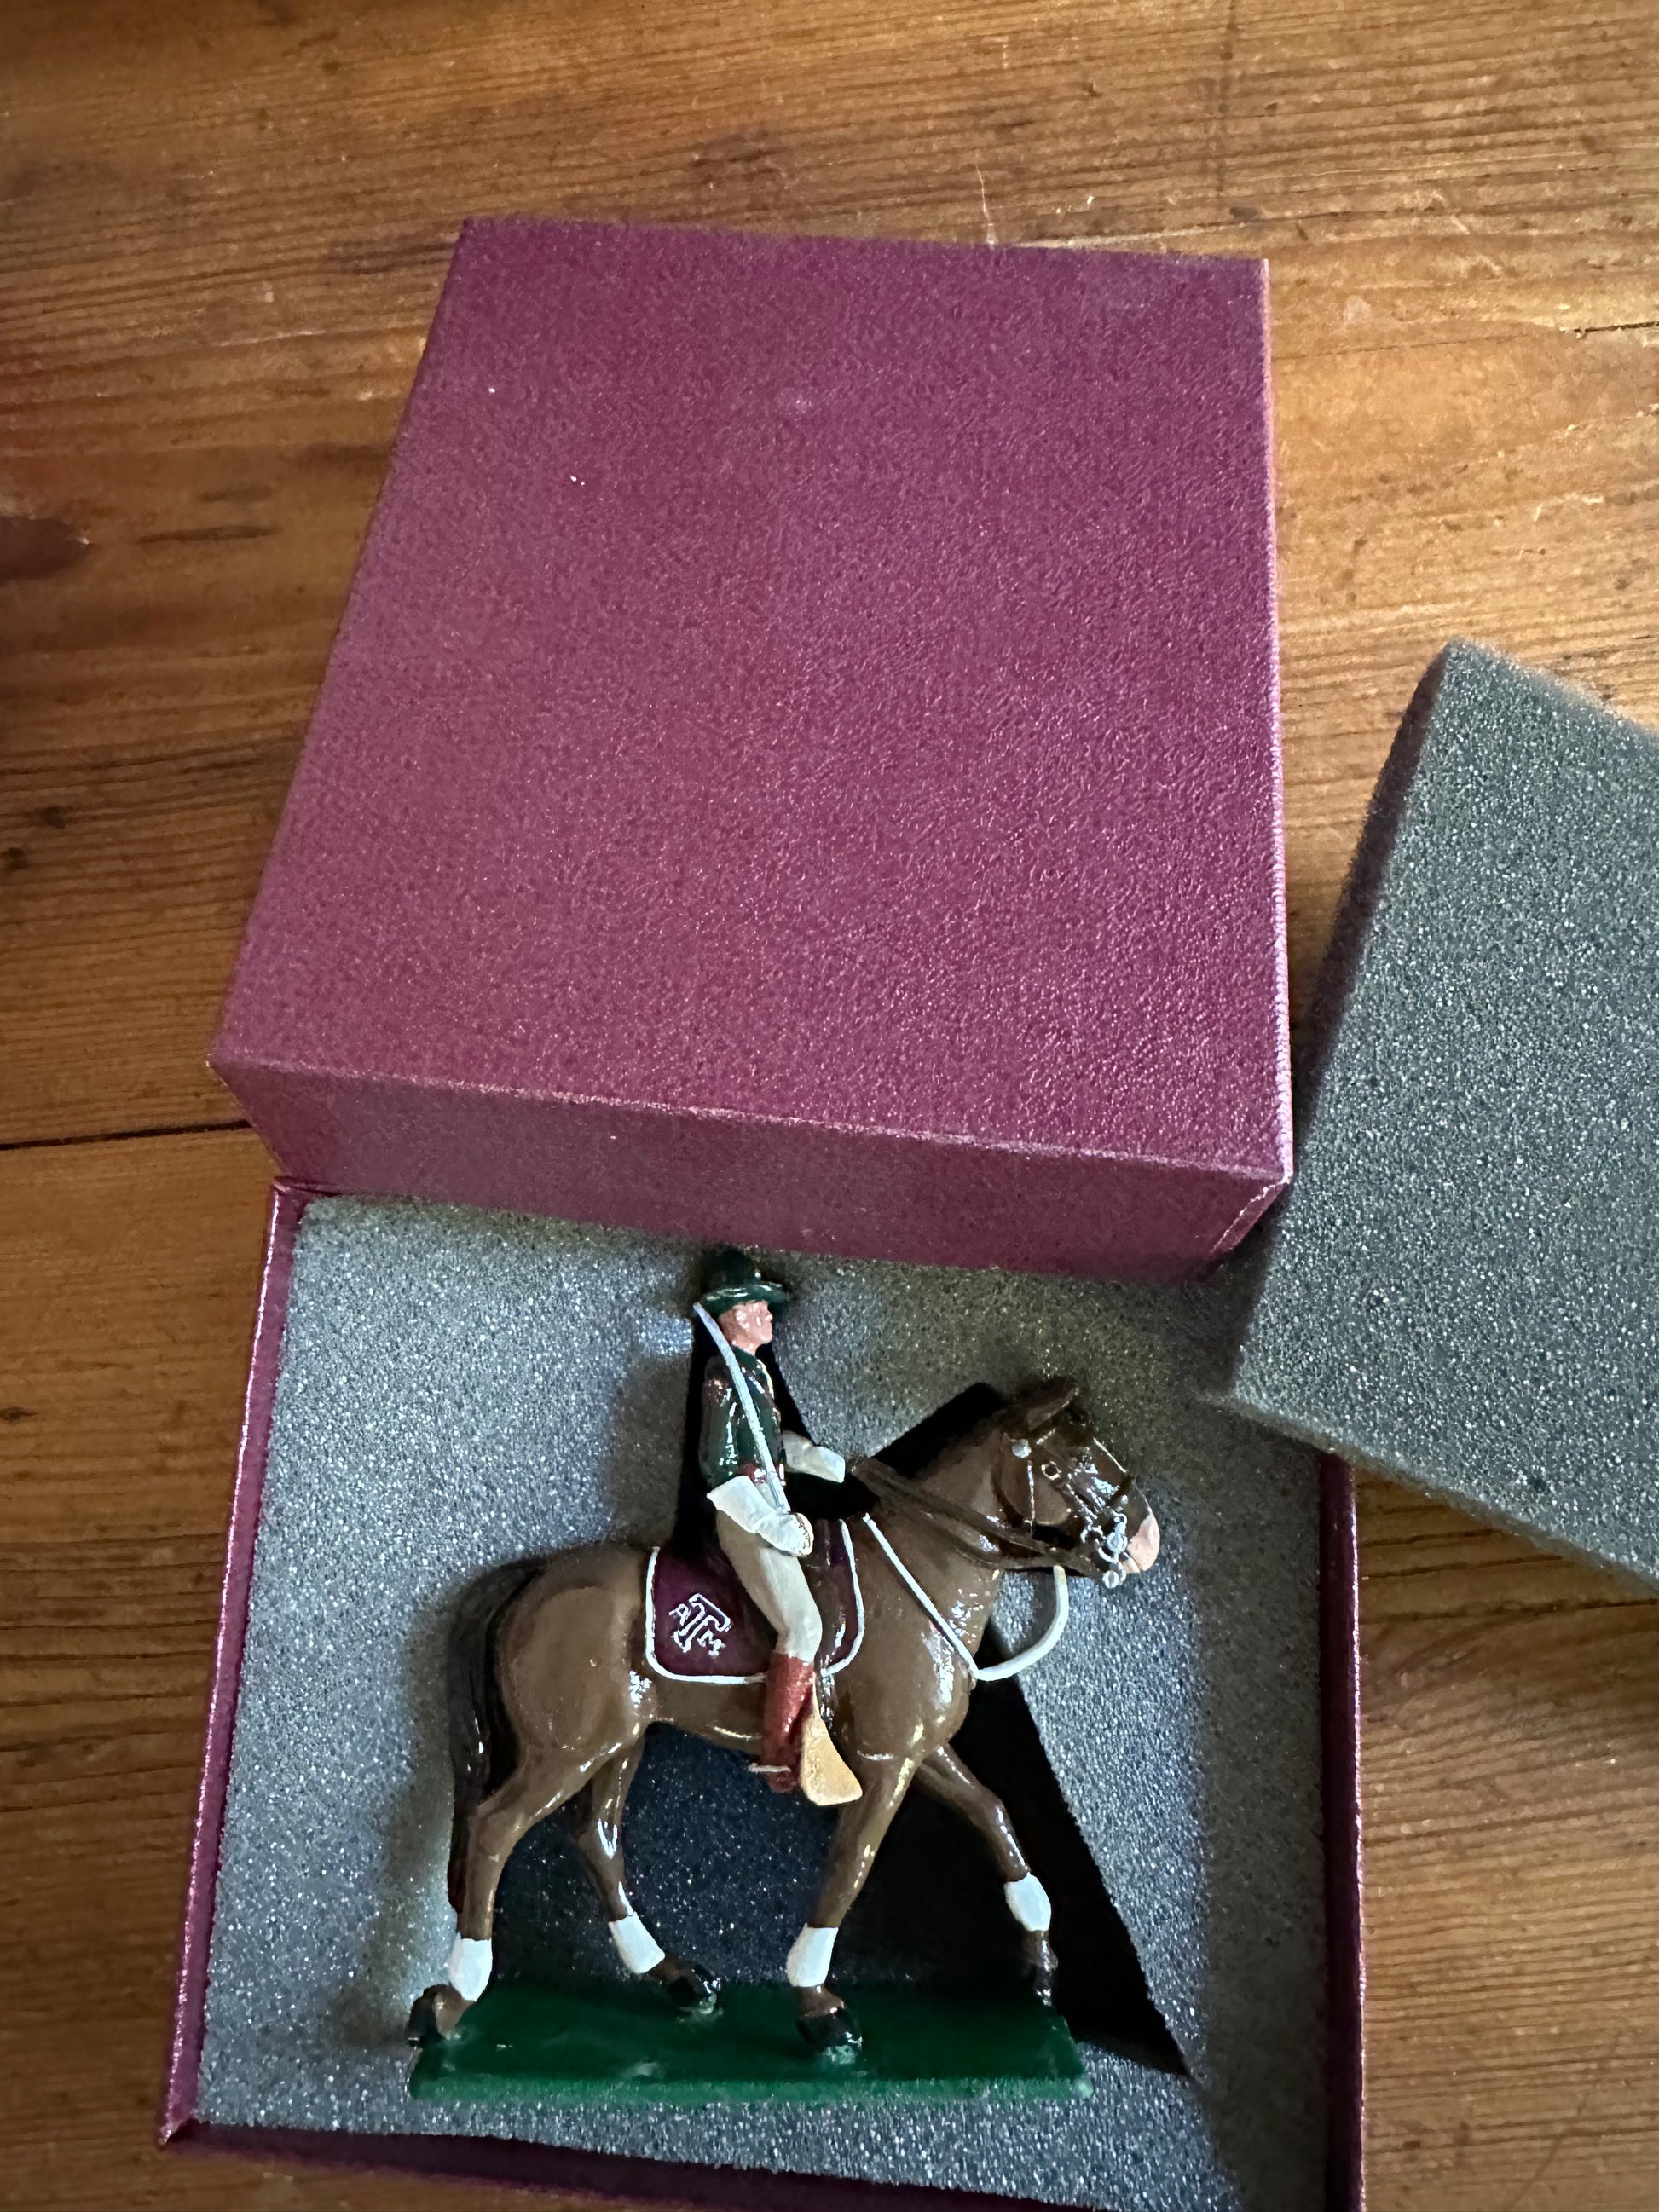 Toy soldier Parson Mounted Cadet packed in maroon box.